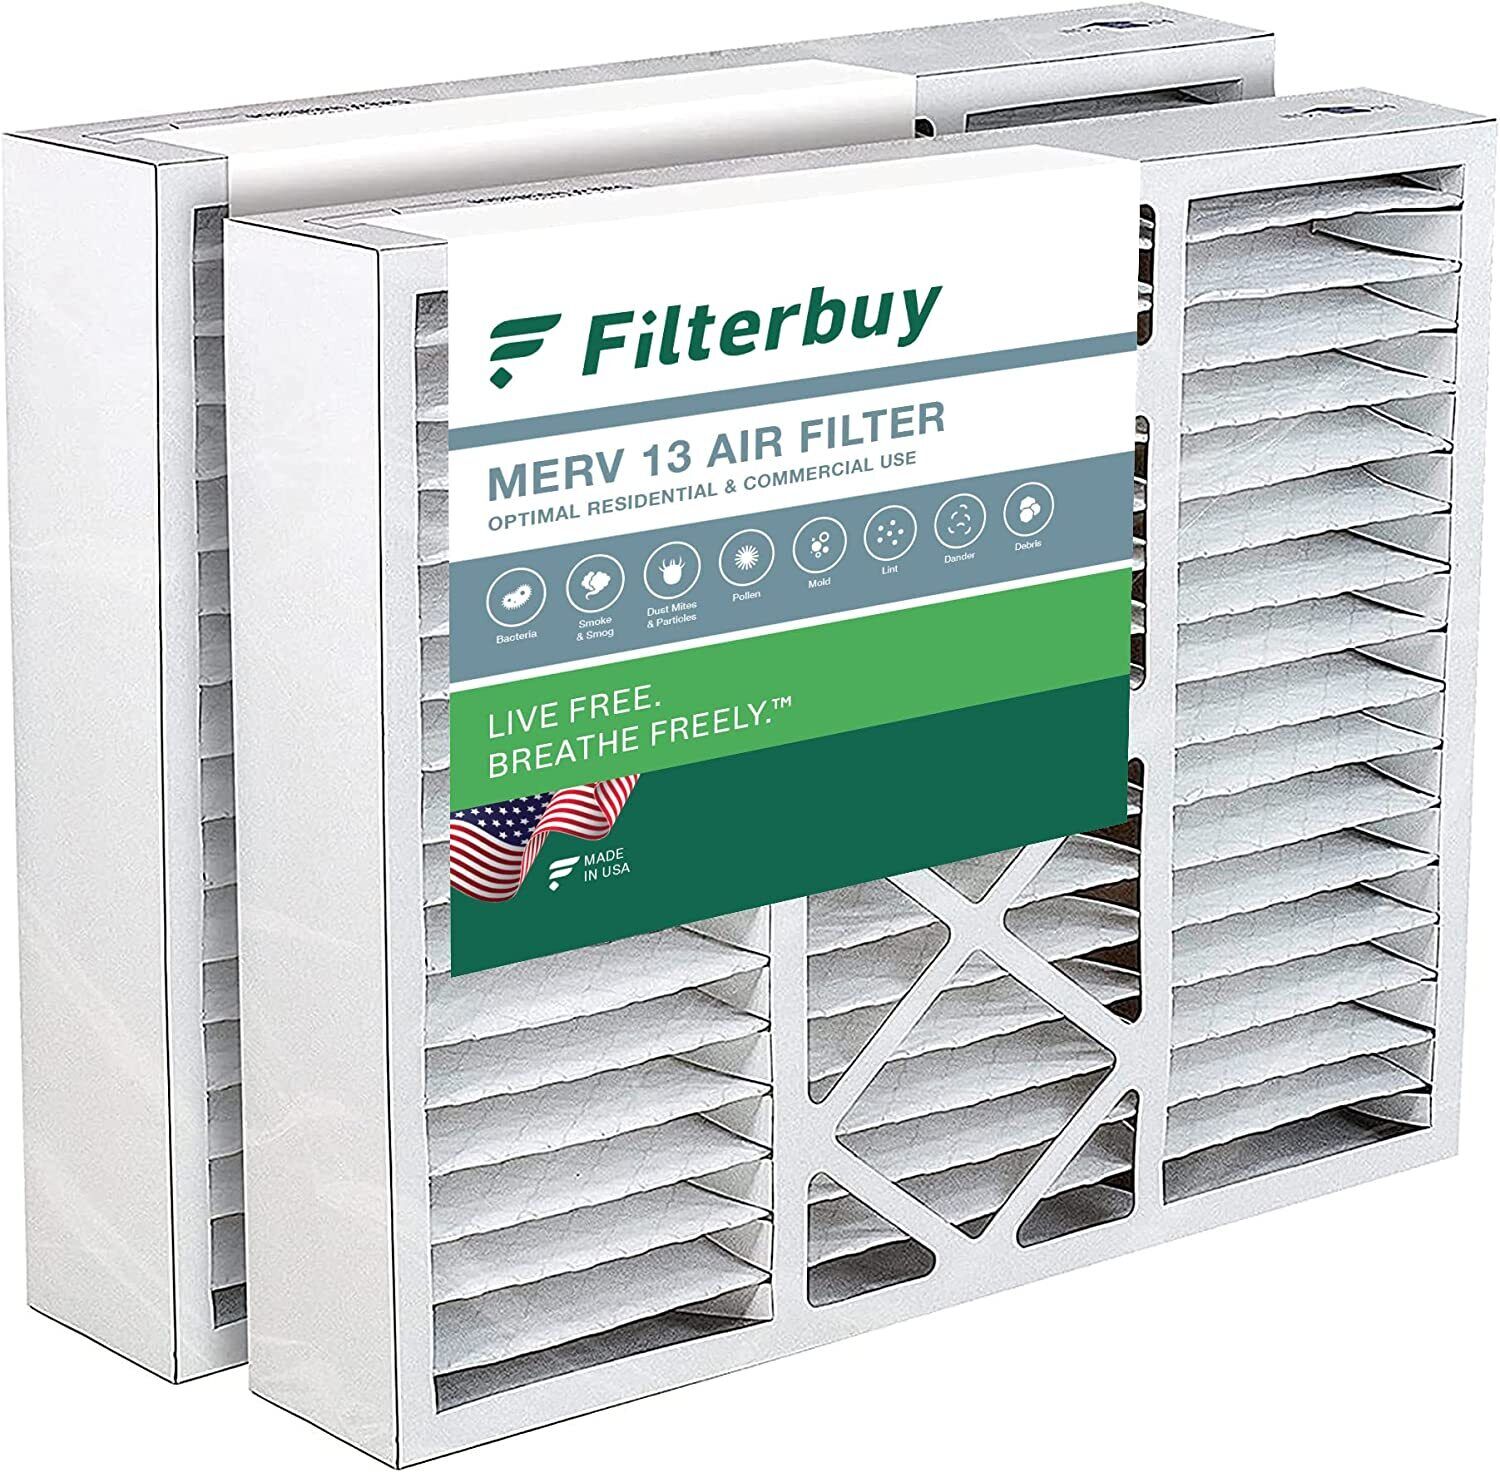 Filterbuy 20x25x5 Air Filters, AC Furnace Replacement for Honeywell (MERV 13)